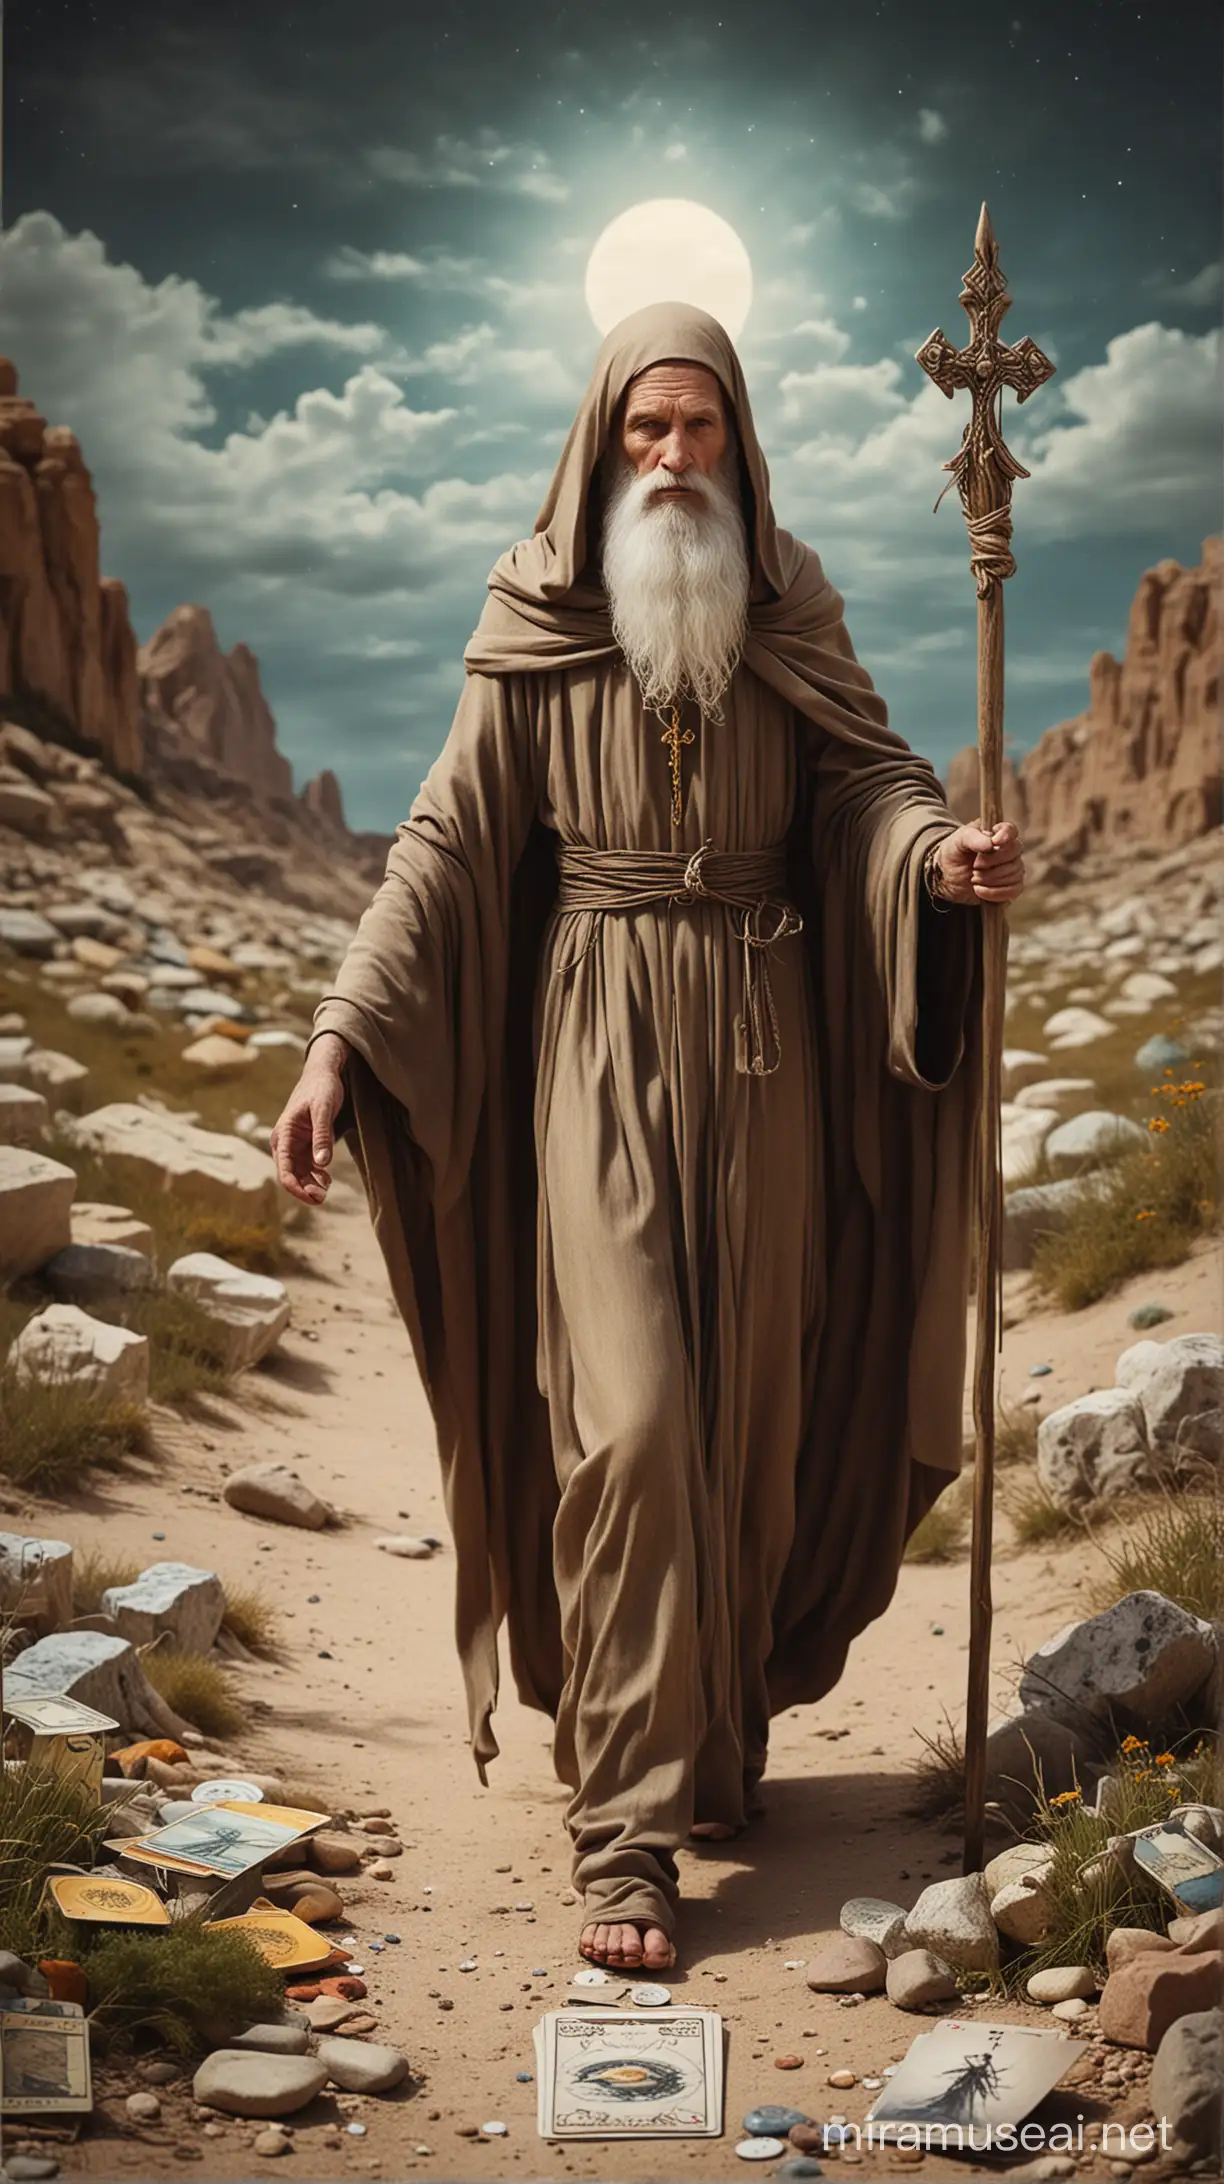 The hermit of tarot walking in renascence, artistic and Plastic 